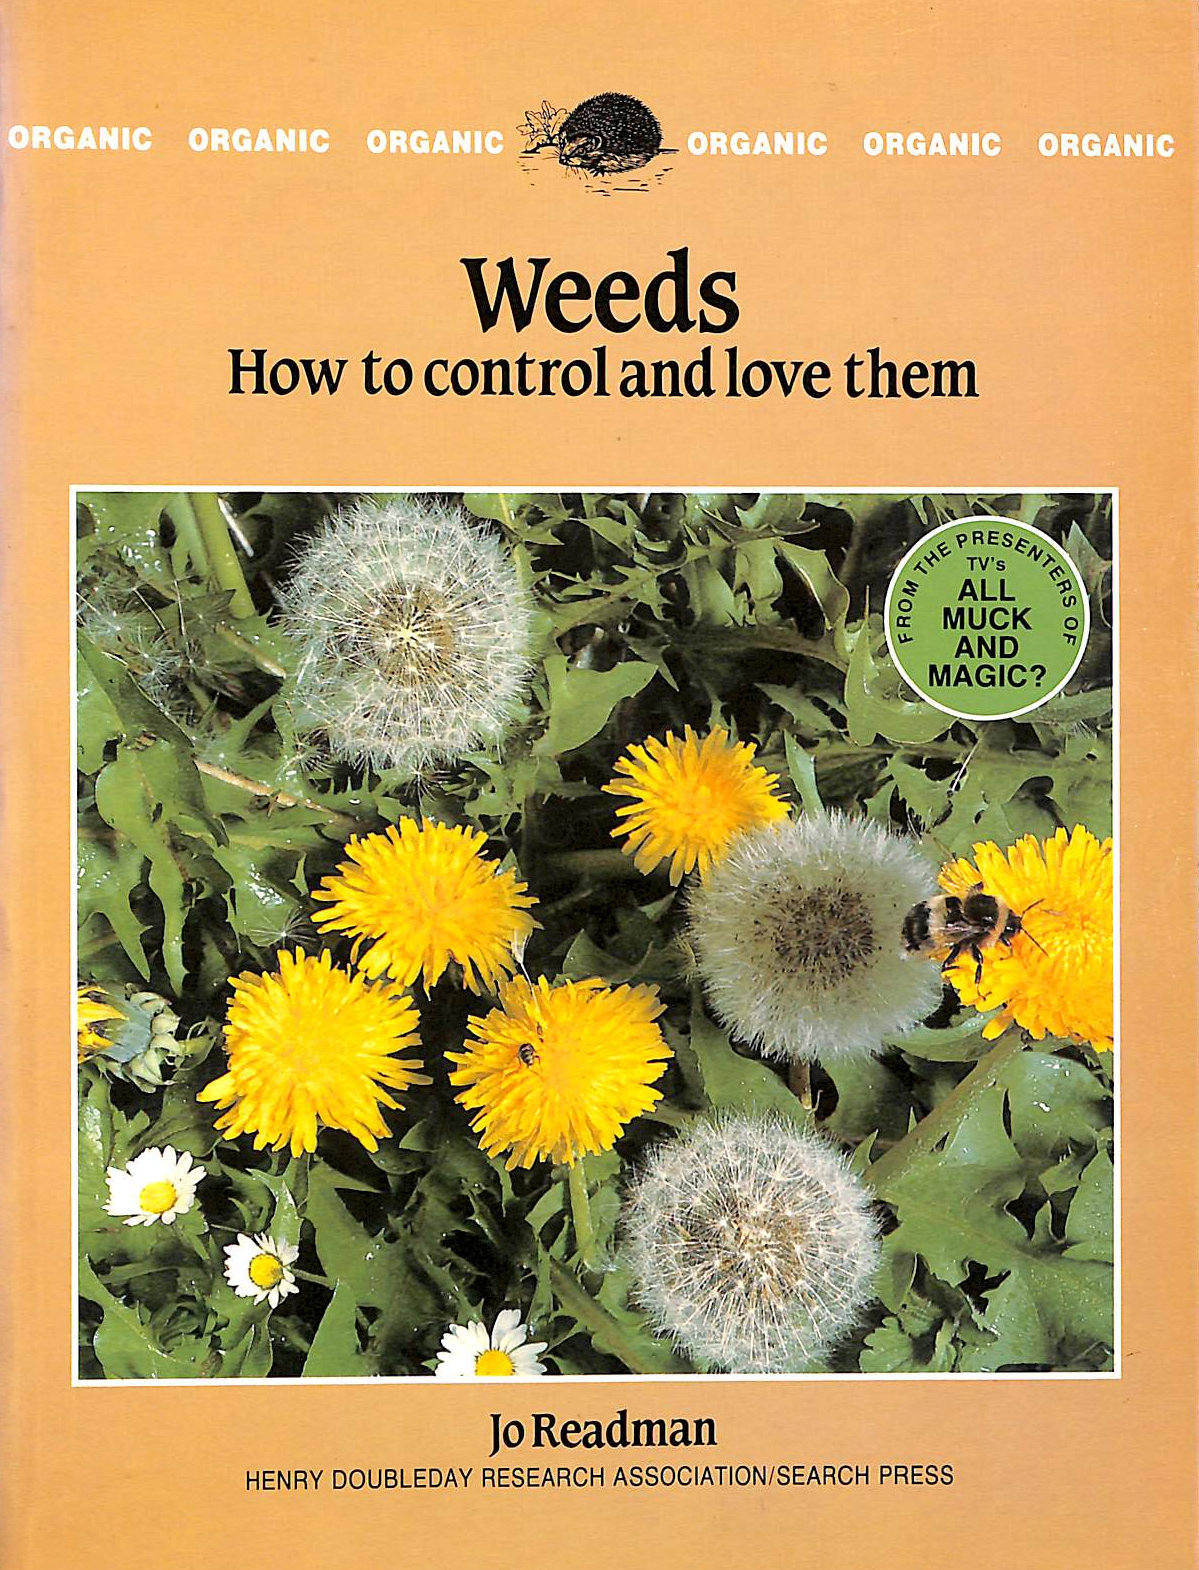 READMAN, JO - Weeds: How to Control and Love Them (The Organic Handbook 5)